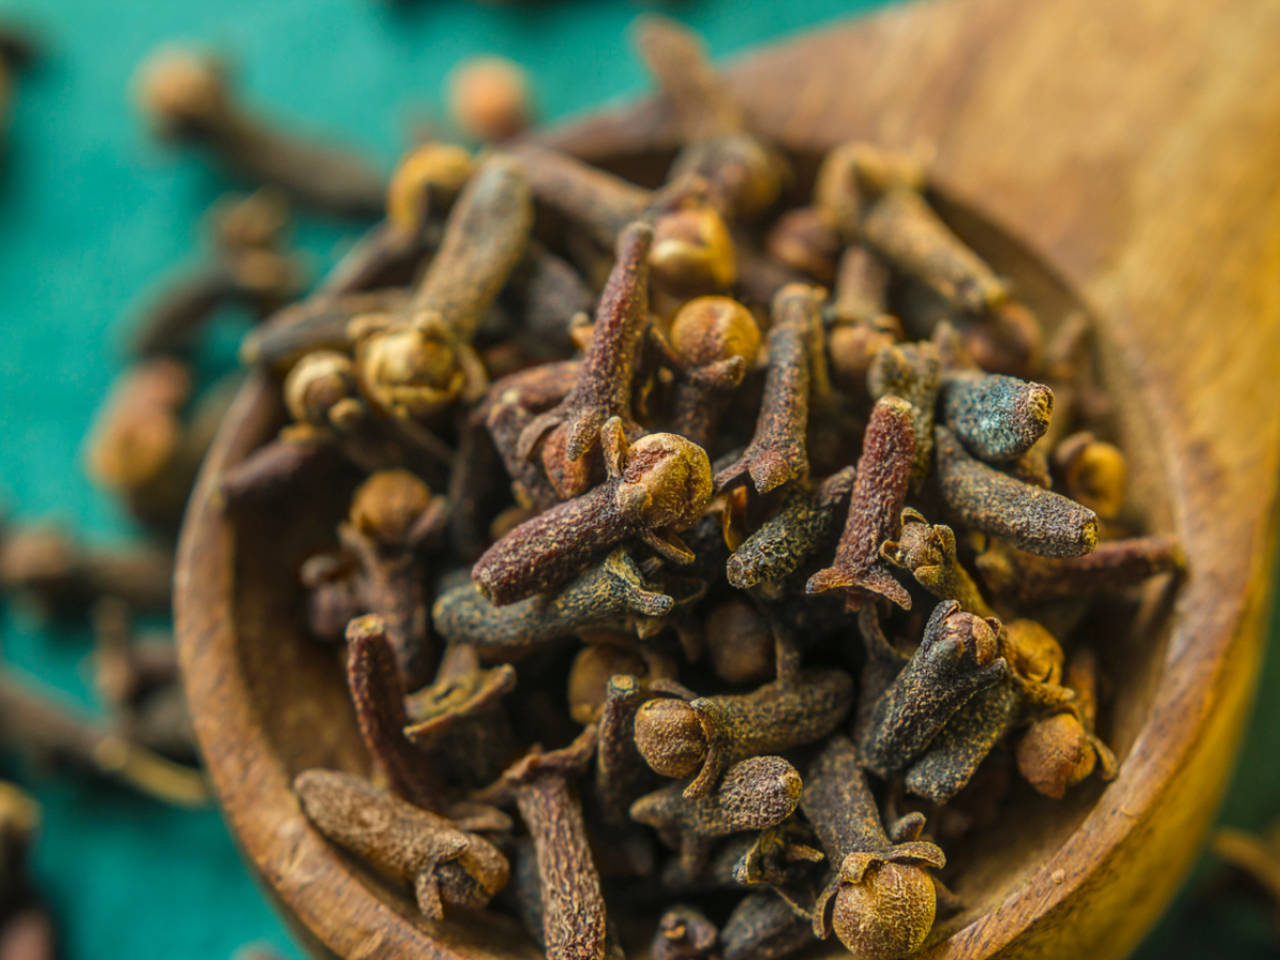 Cloves To Boost Immunity: Eat 2 cloves with warm water before sleeping to  boost immunity and gain other health benefits